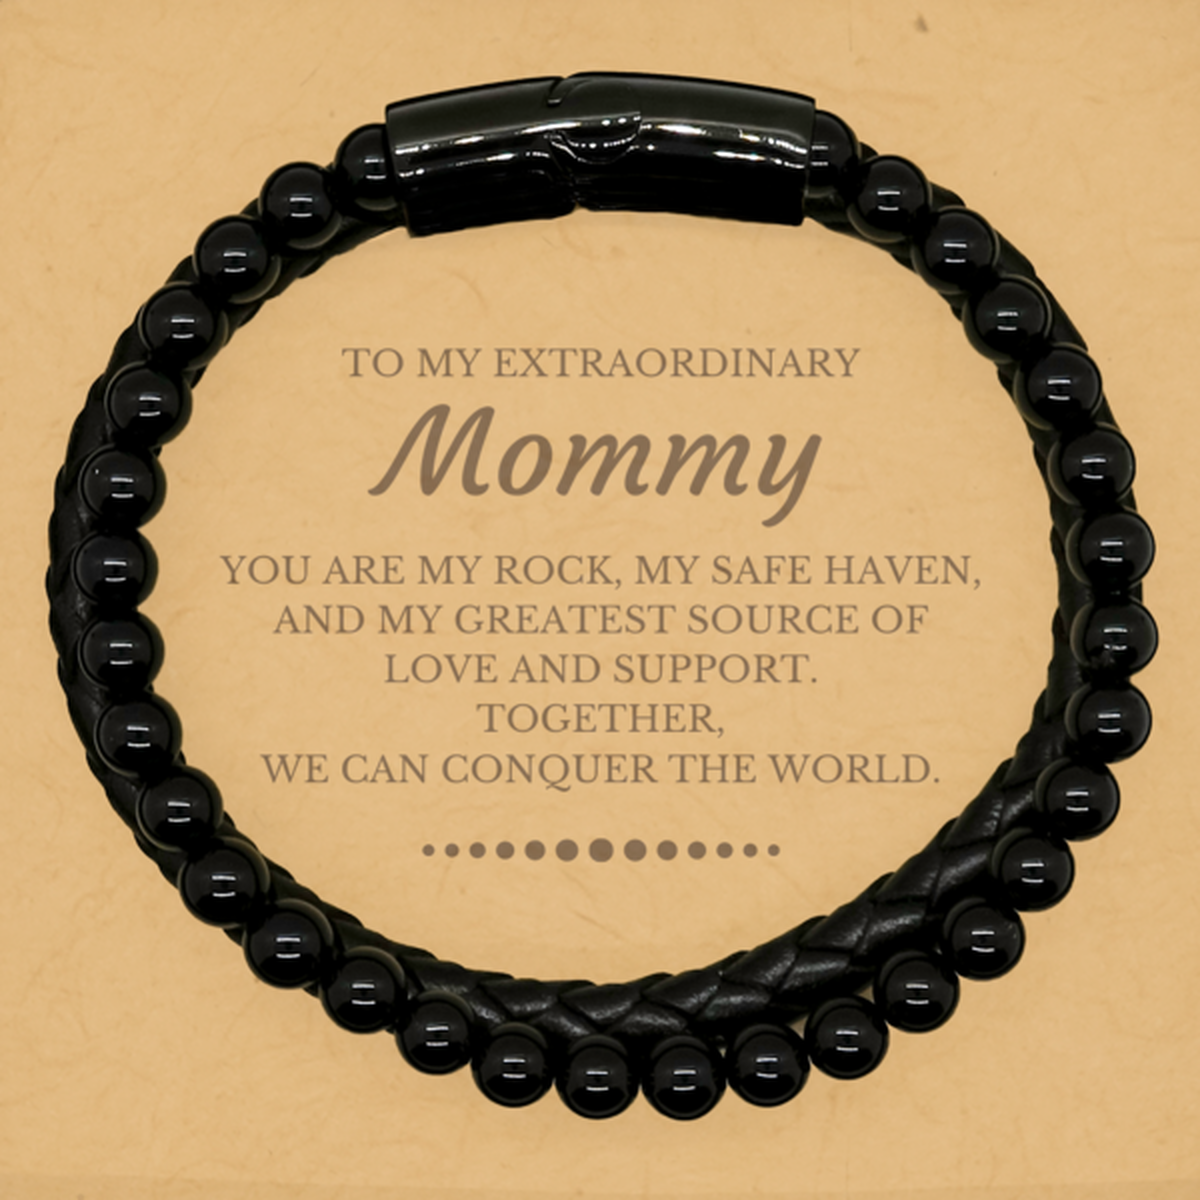 To My Extraordinary Mommy Gifts, Together, we can conquer the world, Birthday Stone Leather Bracelets For Mommy, Christmas Gifts For Mommy